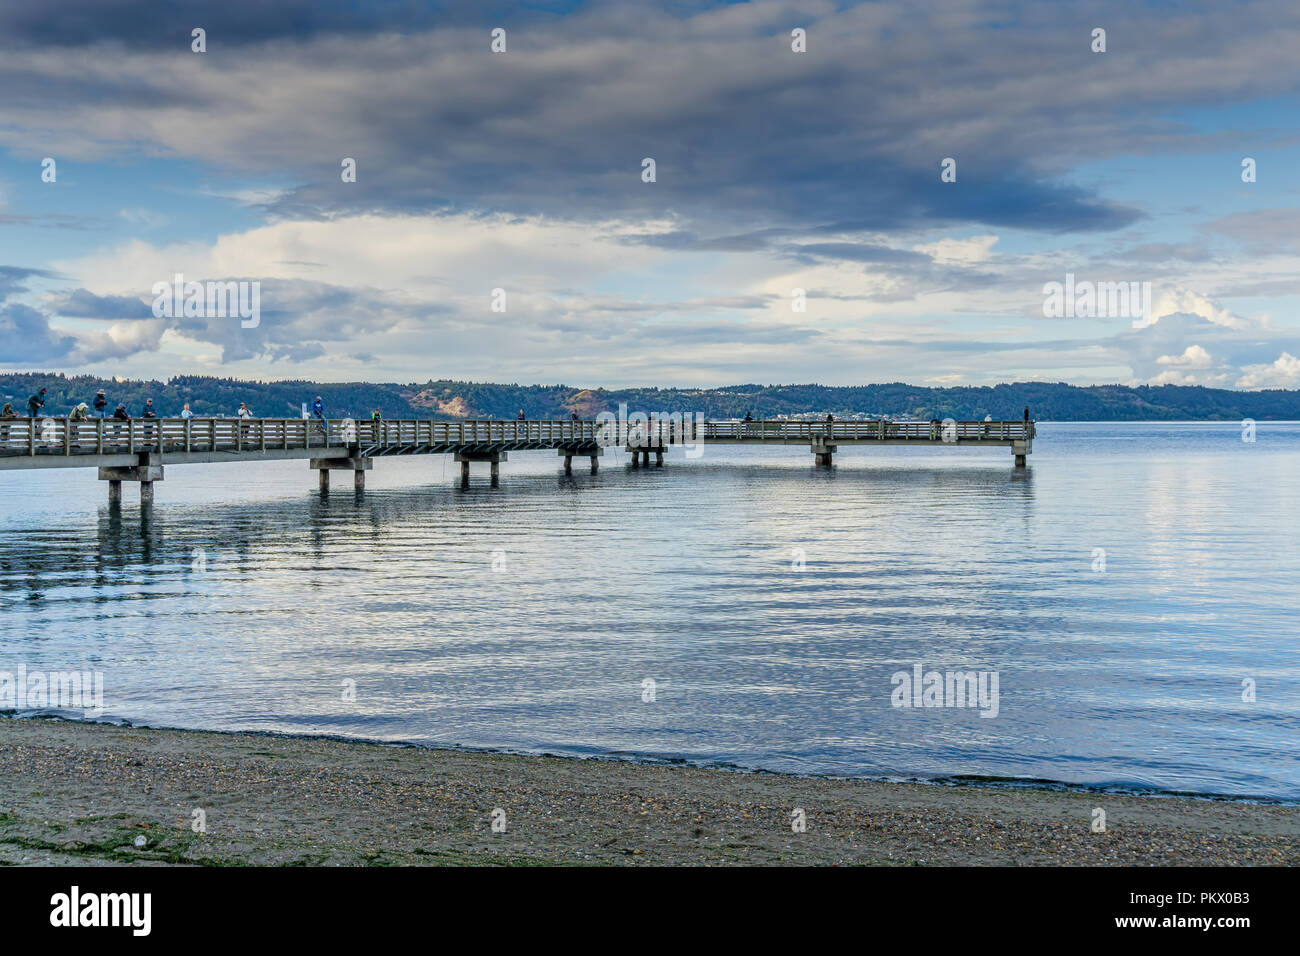 A view of the fishing pier at Dash Point, Washington. Clouds can be seen in the distance. Stock Photo